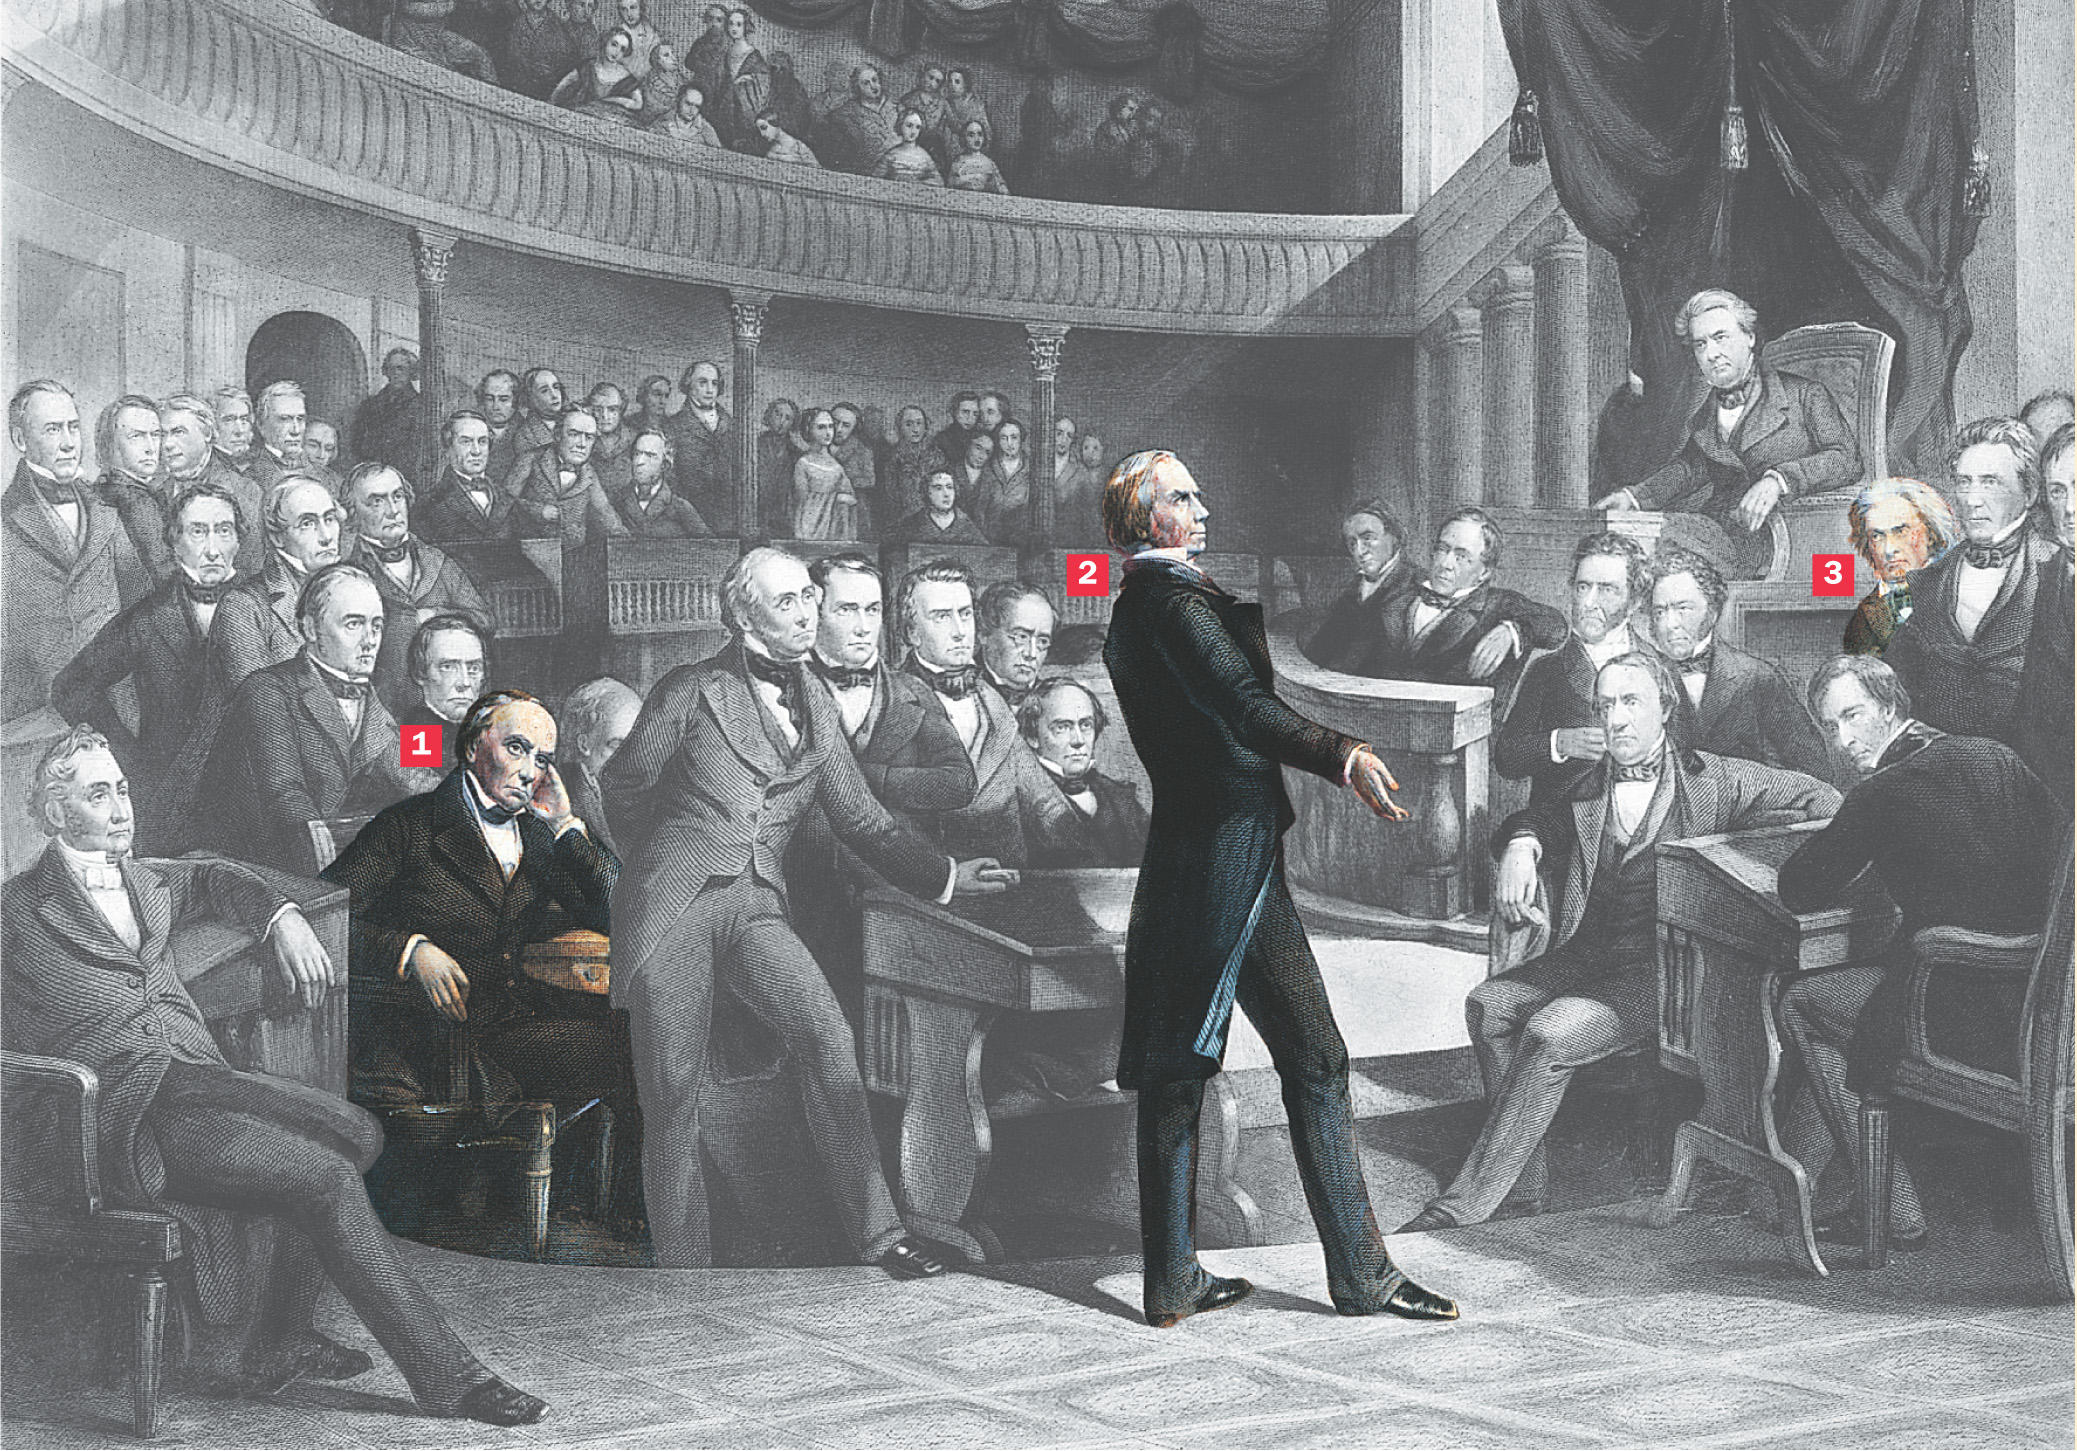 In a painting, Henry Clay stands before the Senate. Daniel Webster and John C. Calhoun watch with the other Senators.